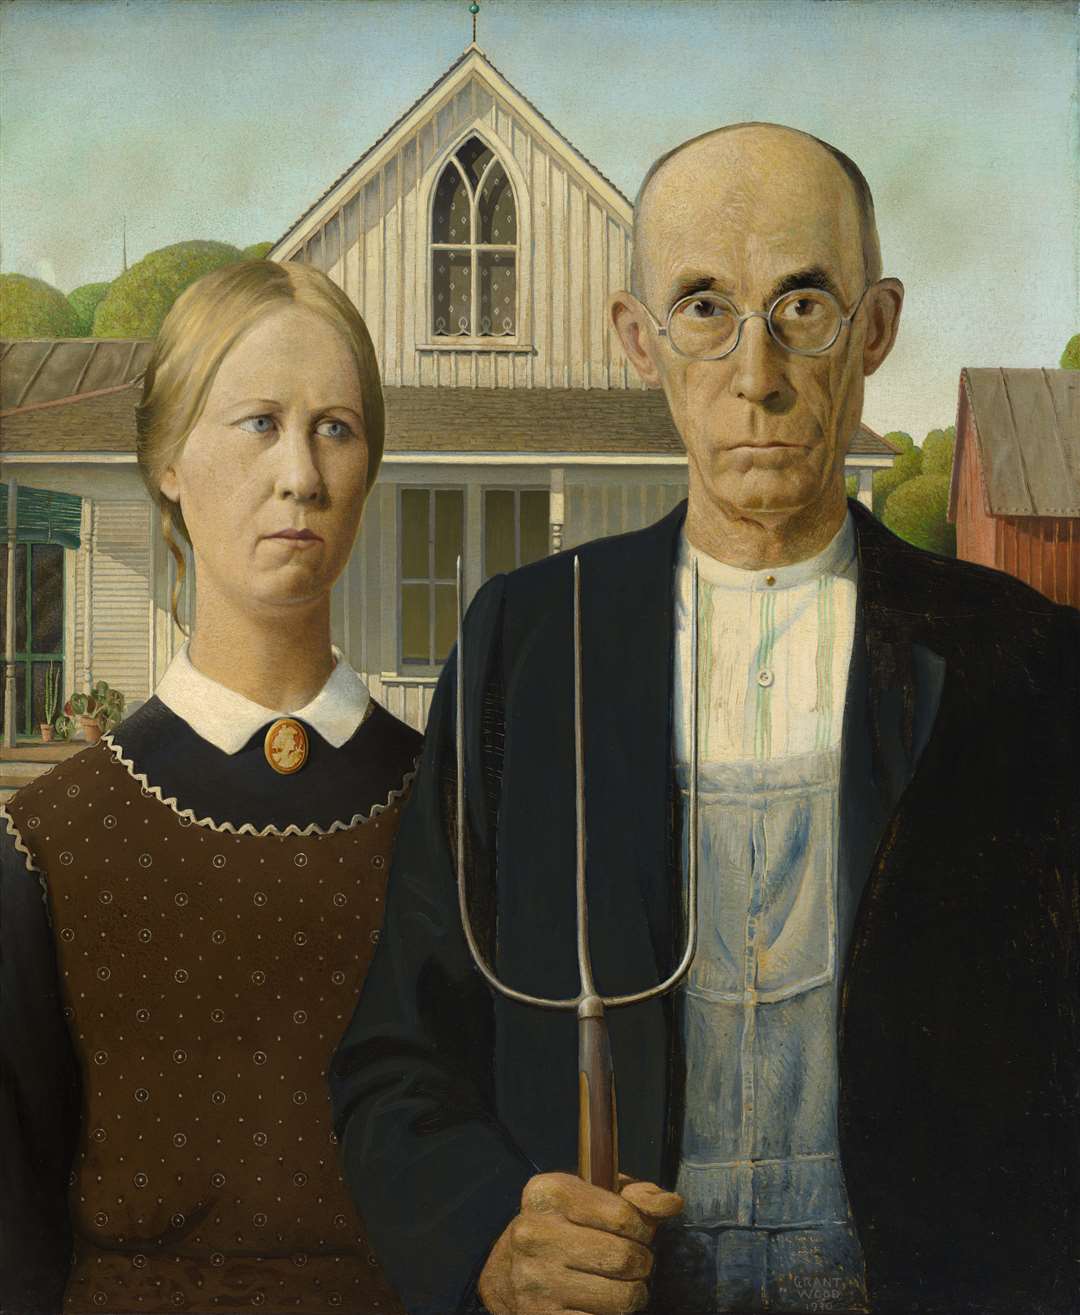 Grant Wood’s American Gothic (1930). Supplied by the Art Institute of Chicago